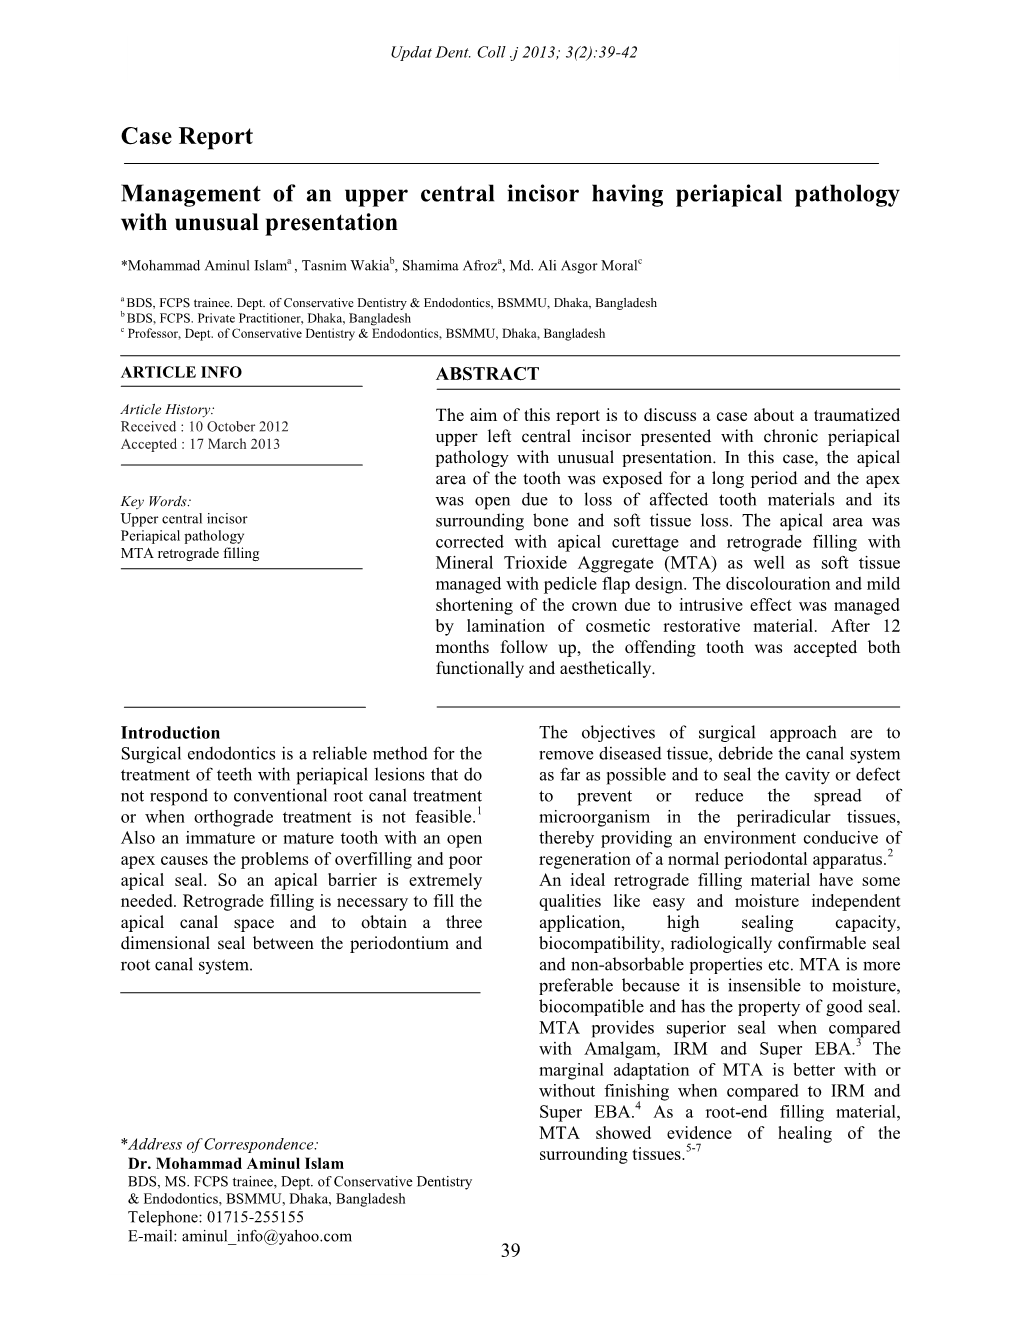 Case Report Management of an Upper Central Incisor Having Periapical